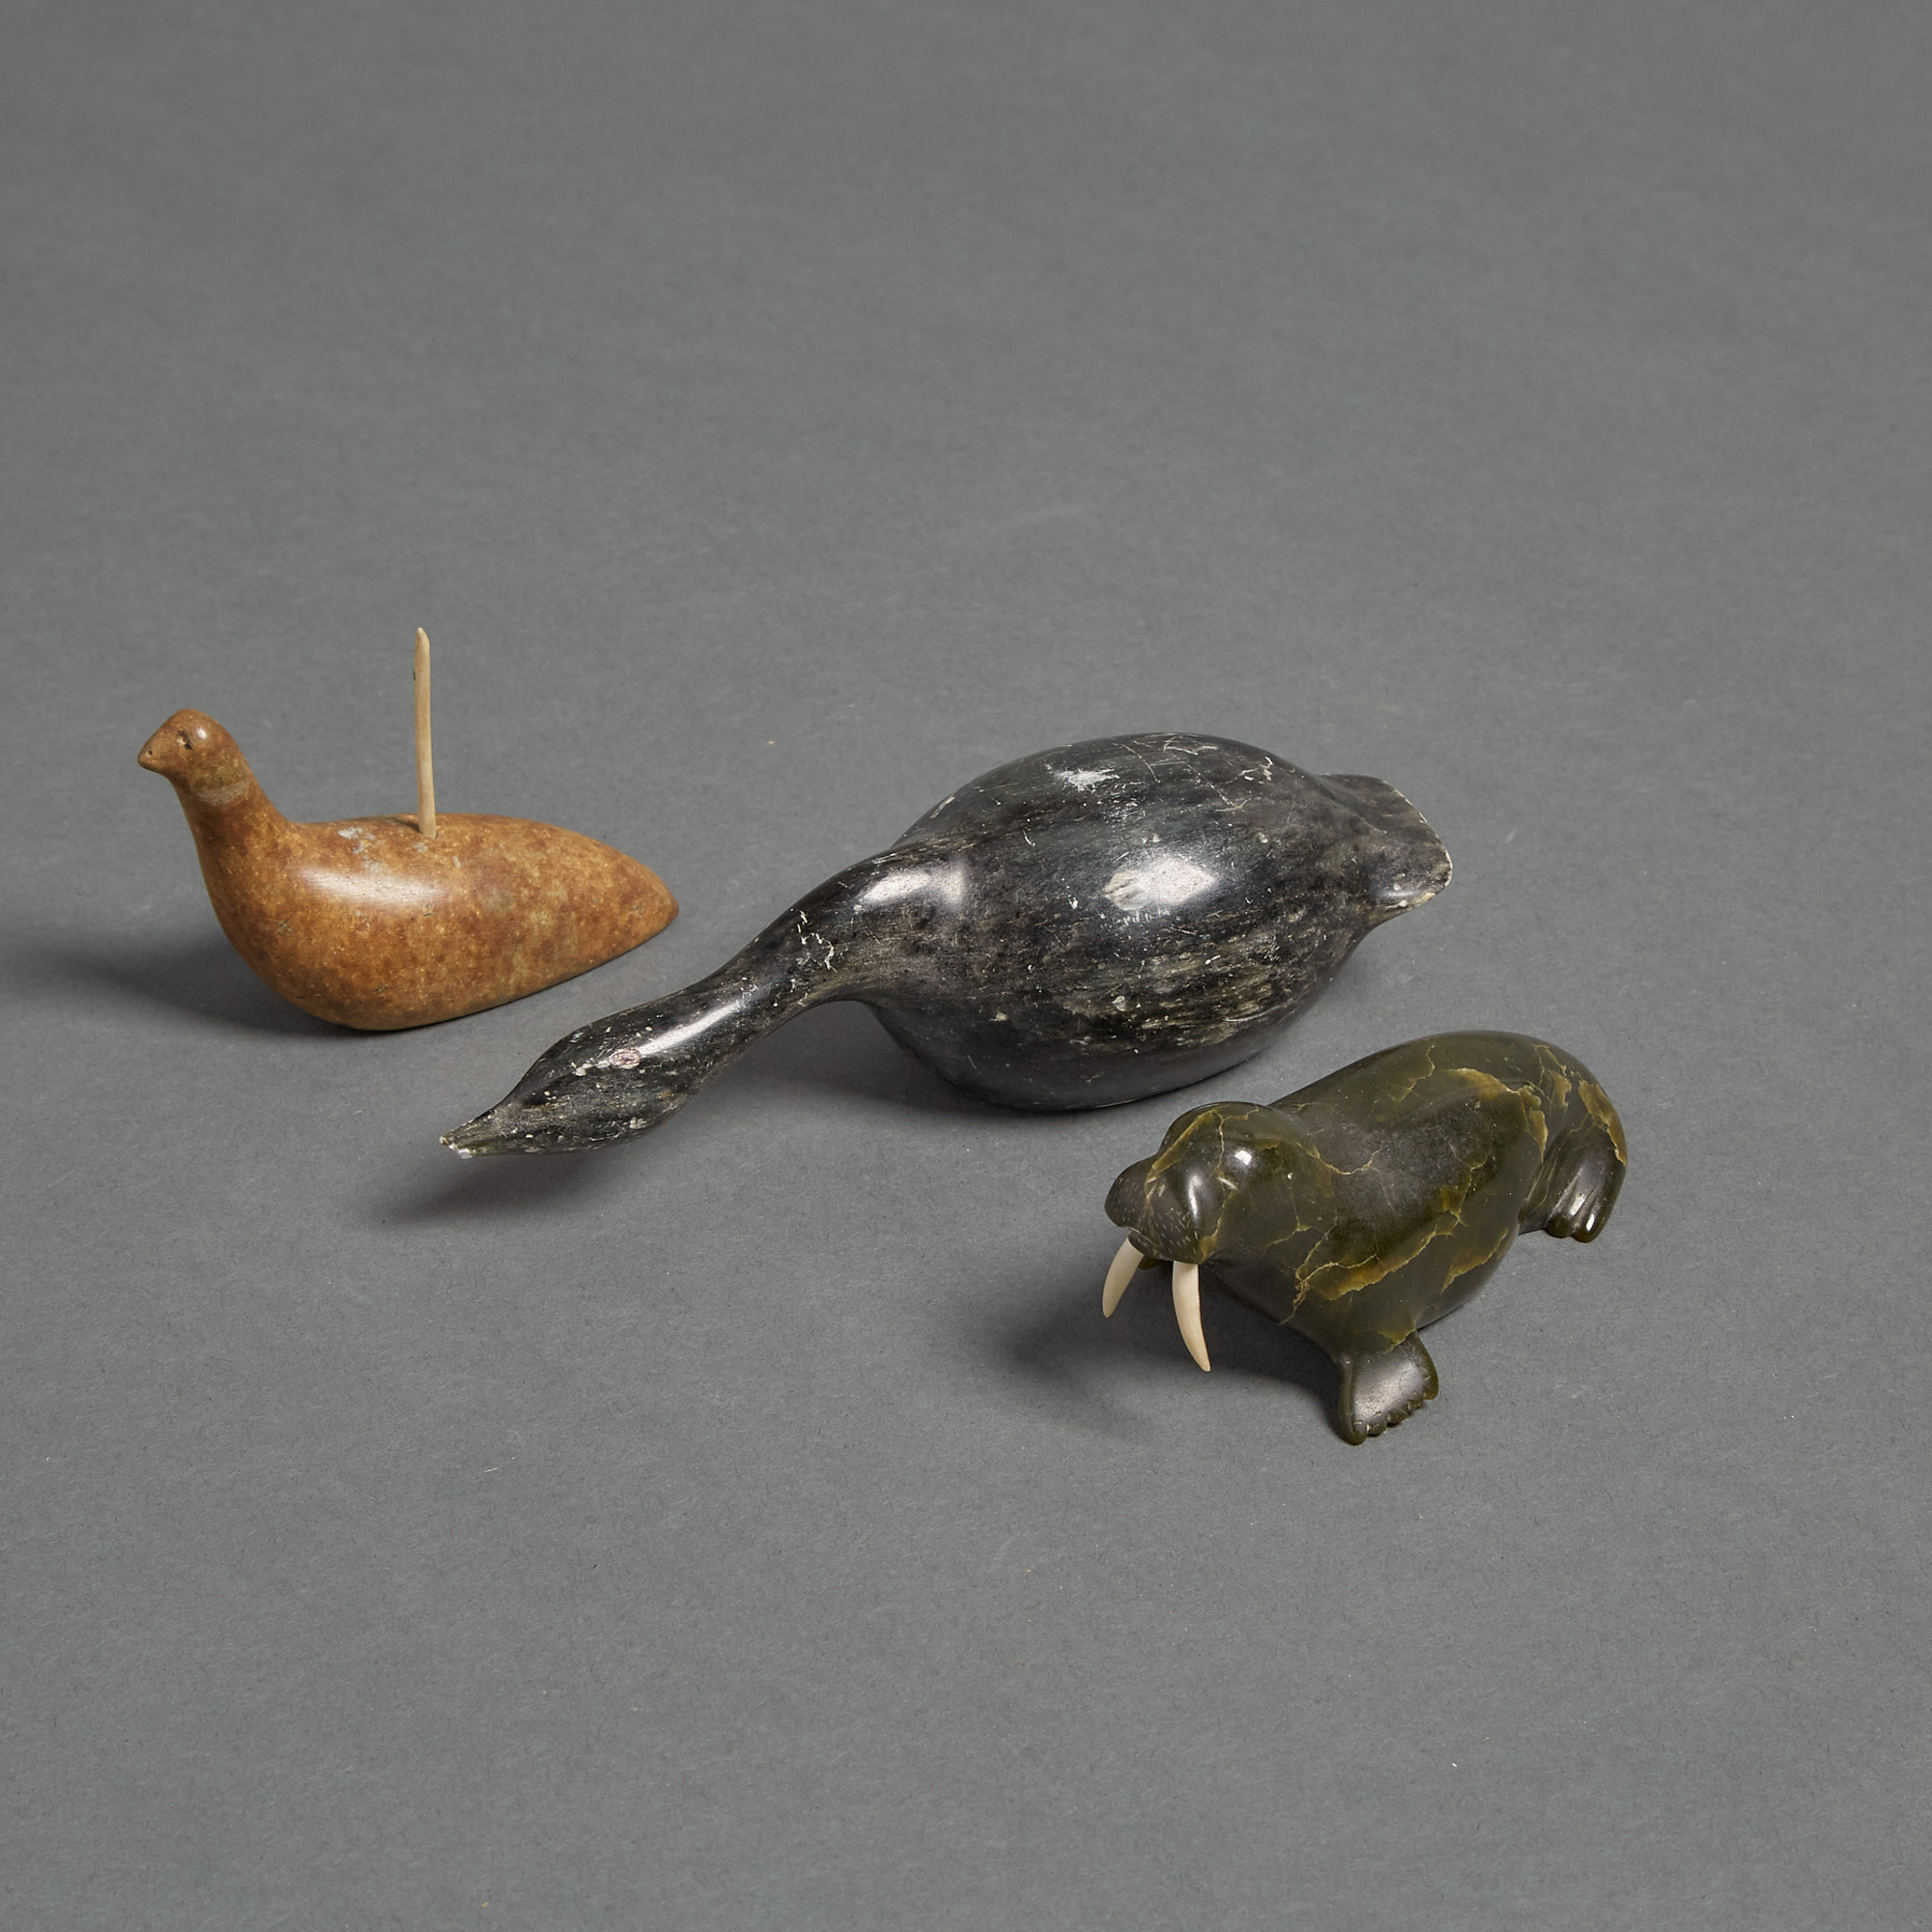 GROUP OF THREE SMALL SCULPTURES